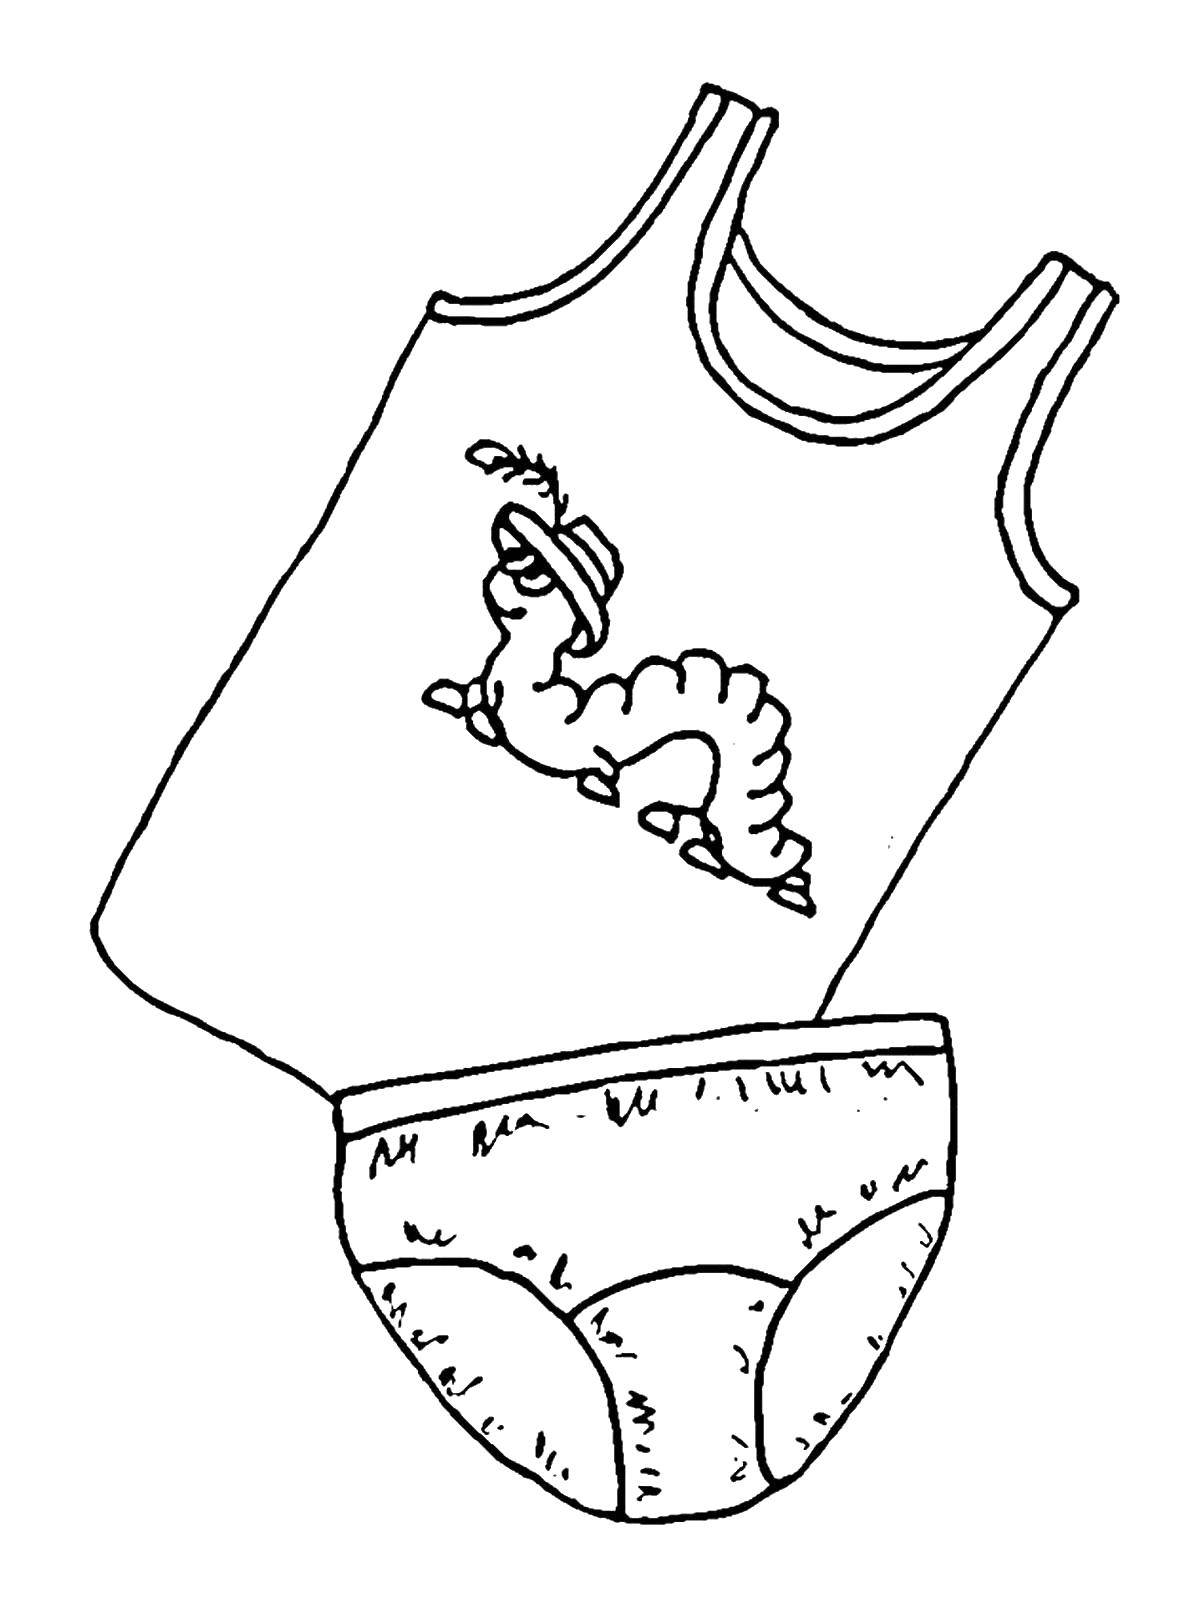 Coloring Baby clothes with a picture of a caterpillar. Category clothing. Tags:  Clothing, children, t-shirt, caterpillar.